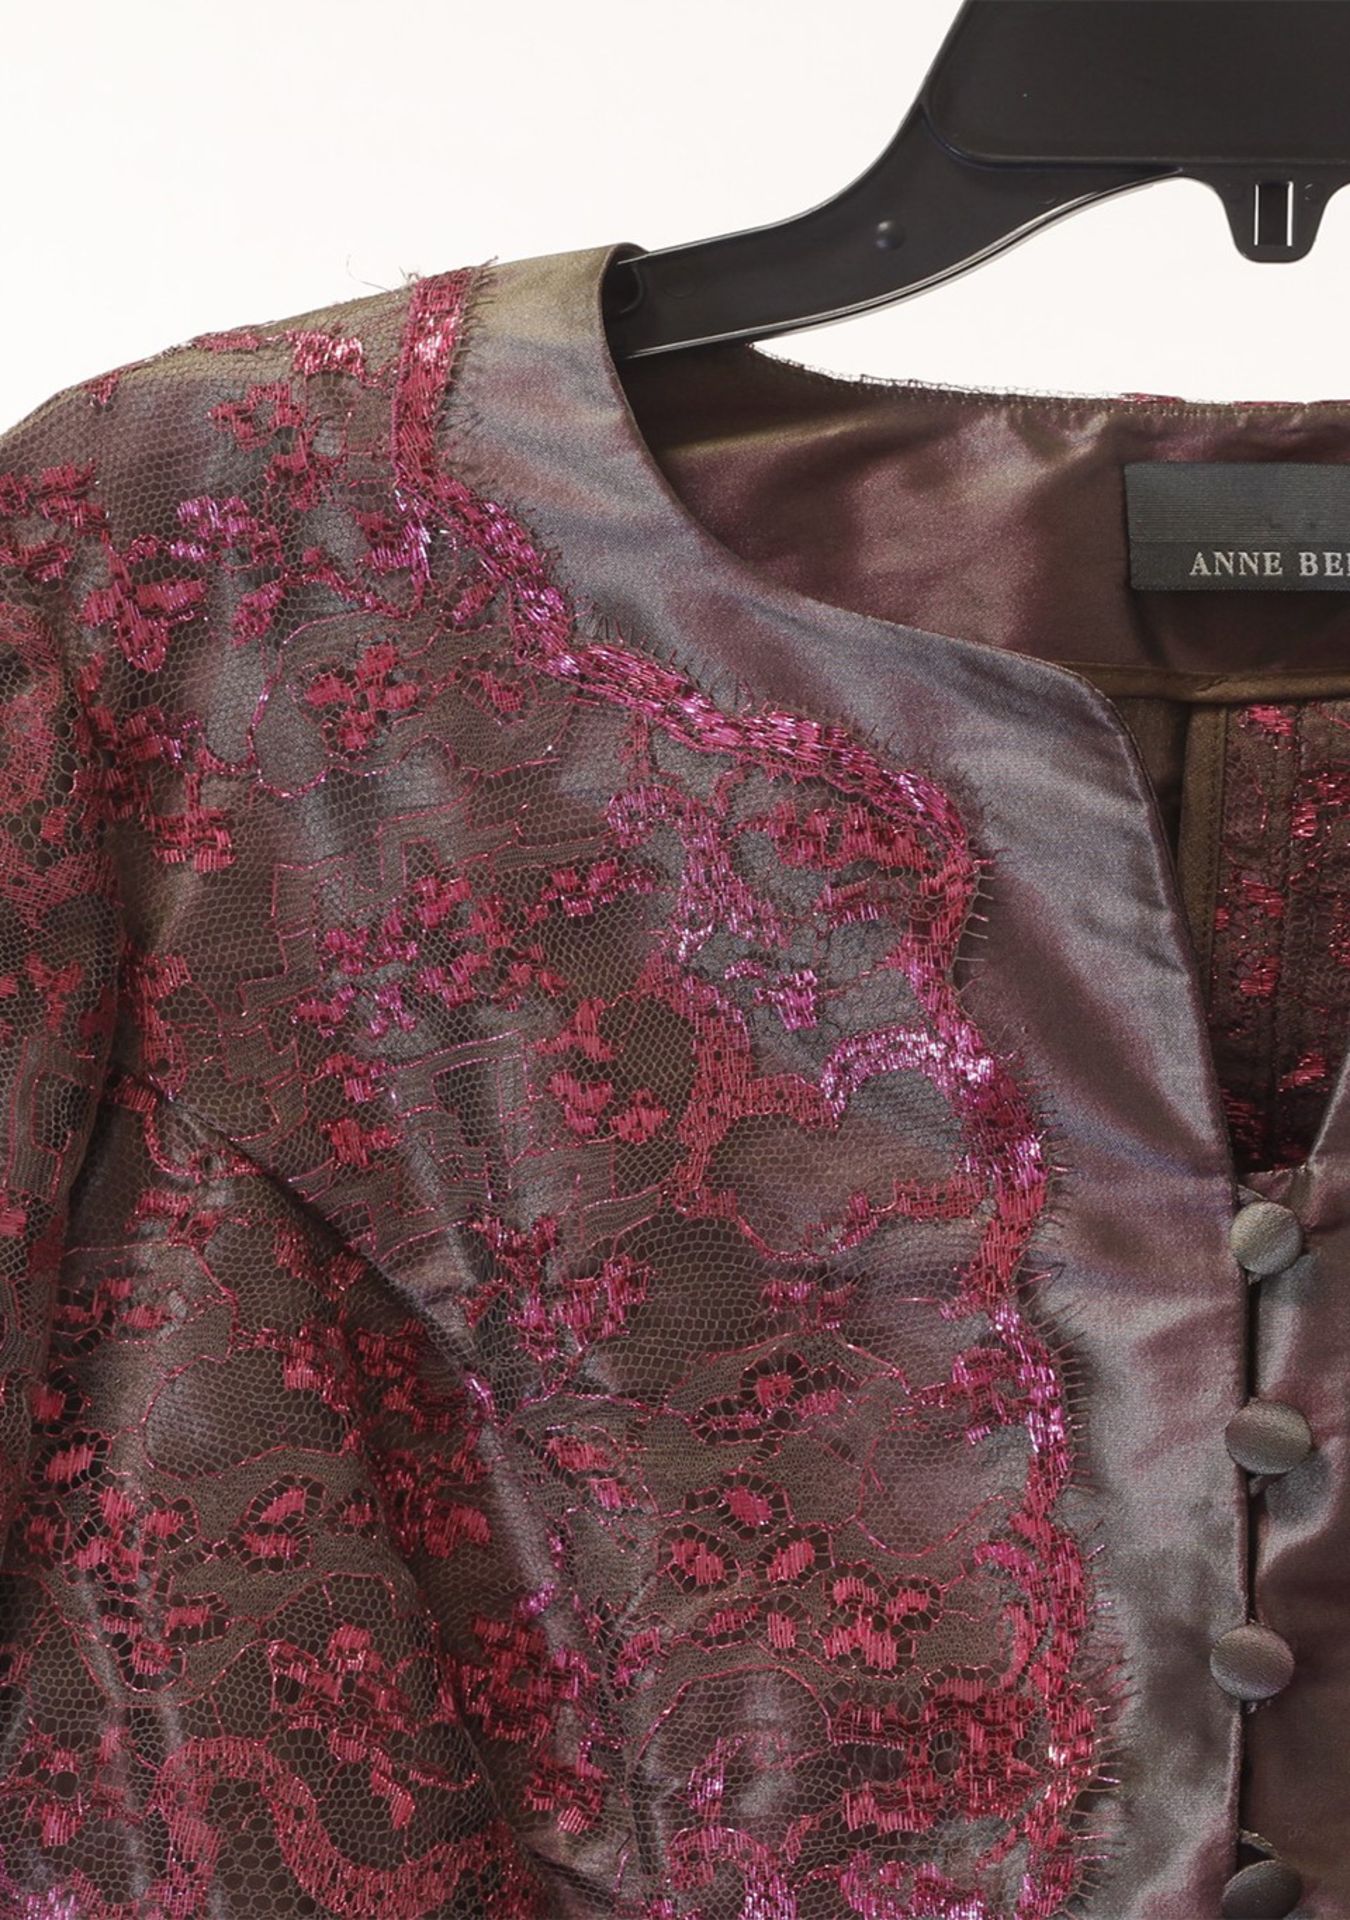 1 x Anne Belin Purple Pink Jacket - From a High End Clothing Boutique In The Netherlands - Image 7 of 11